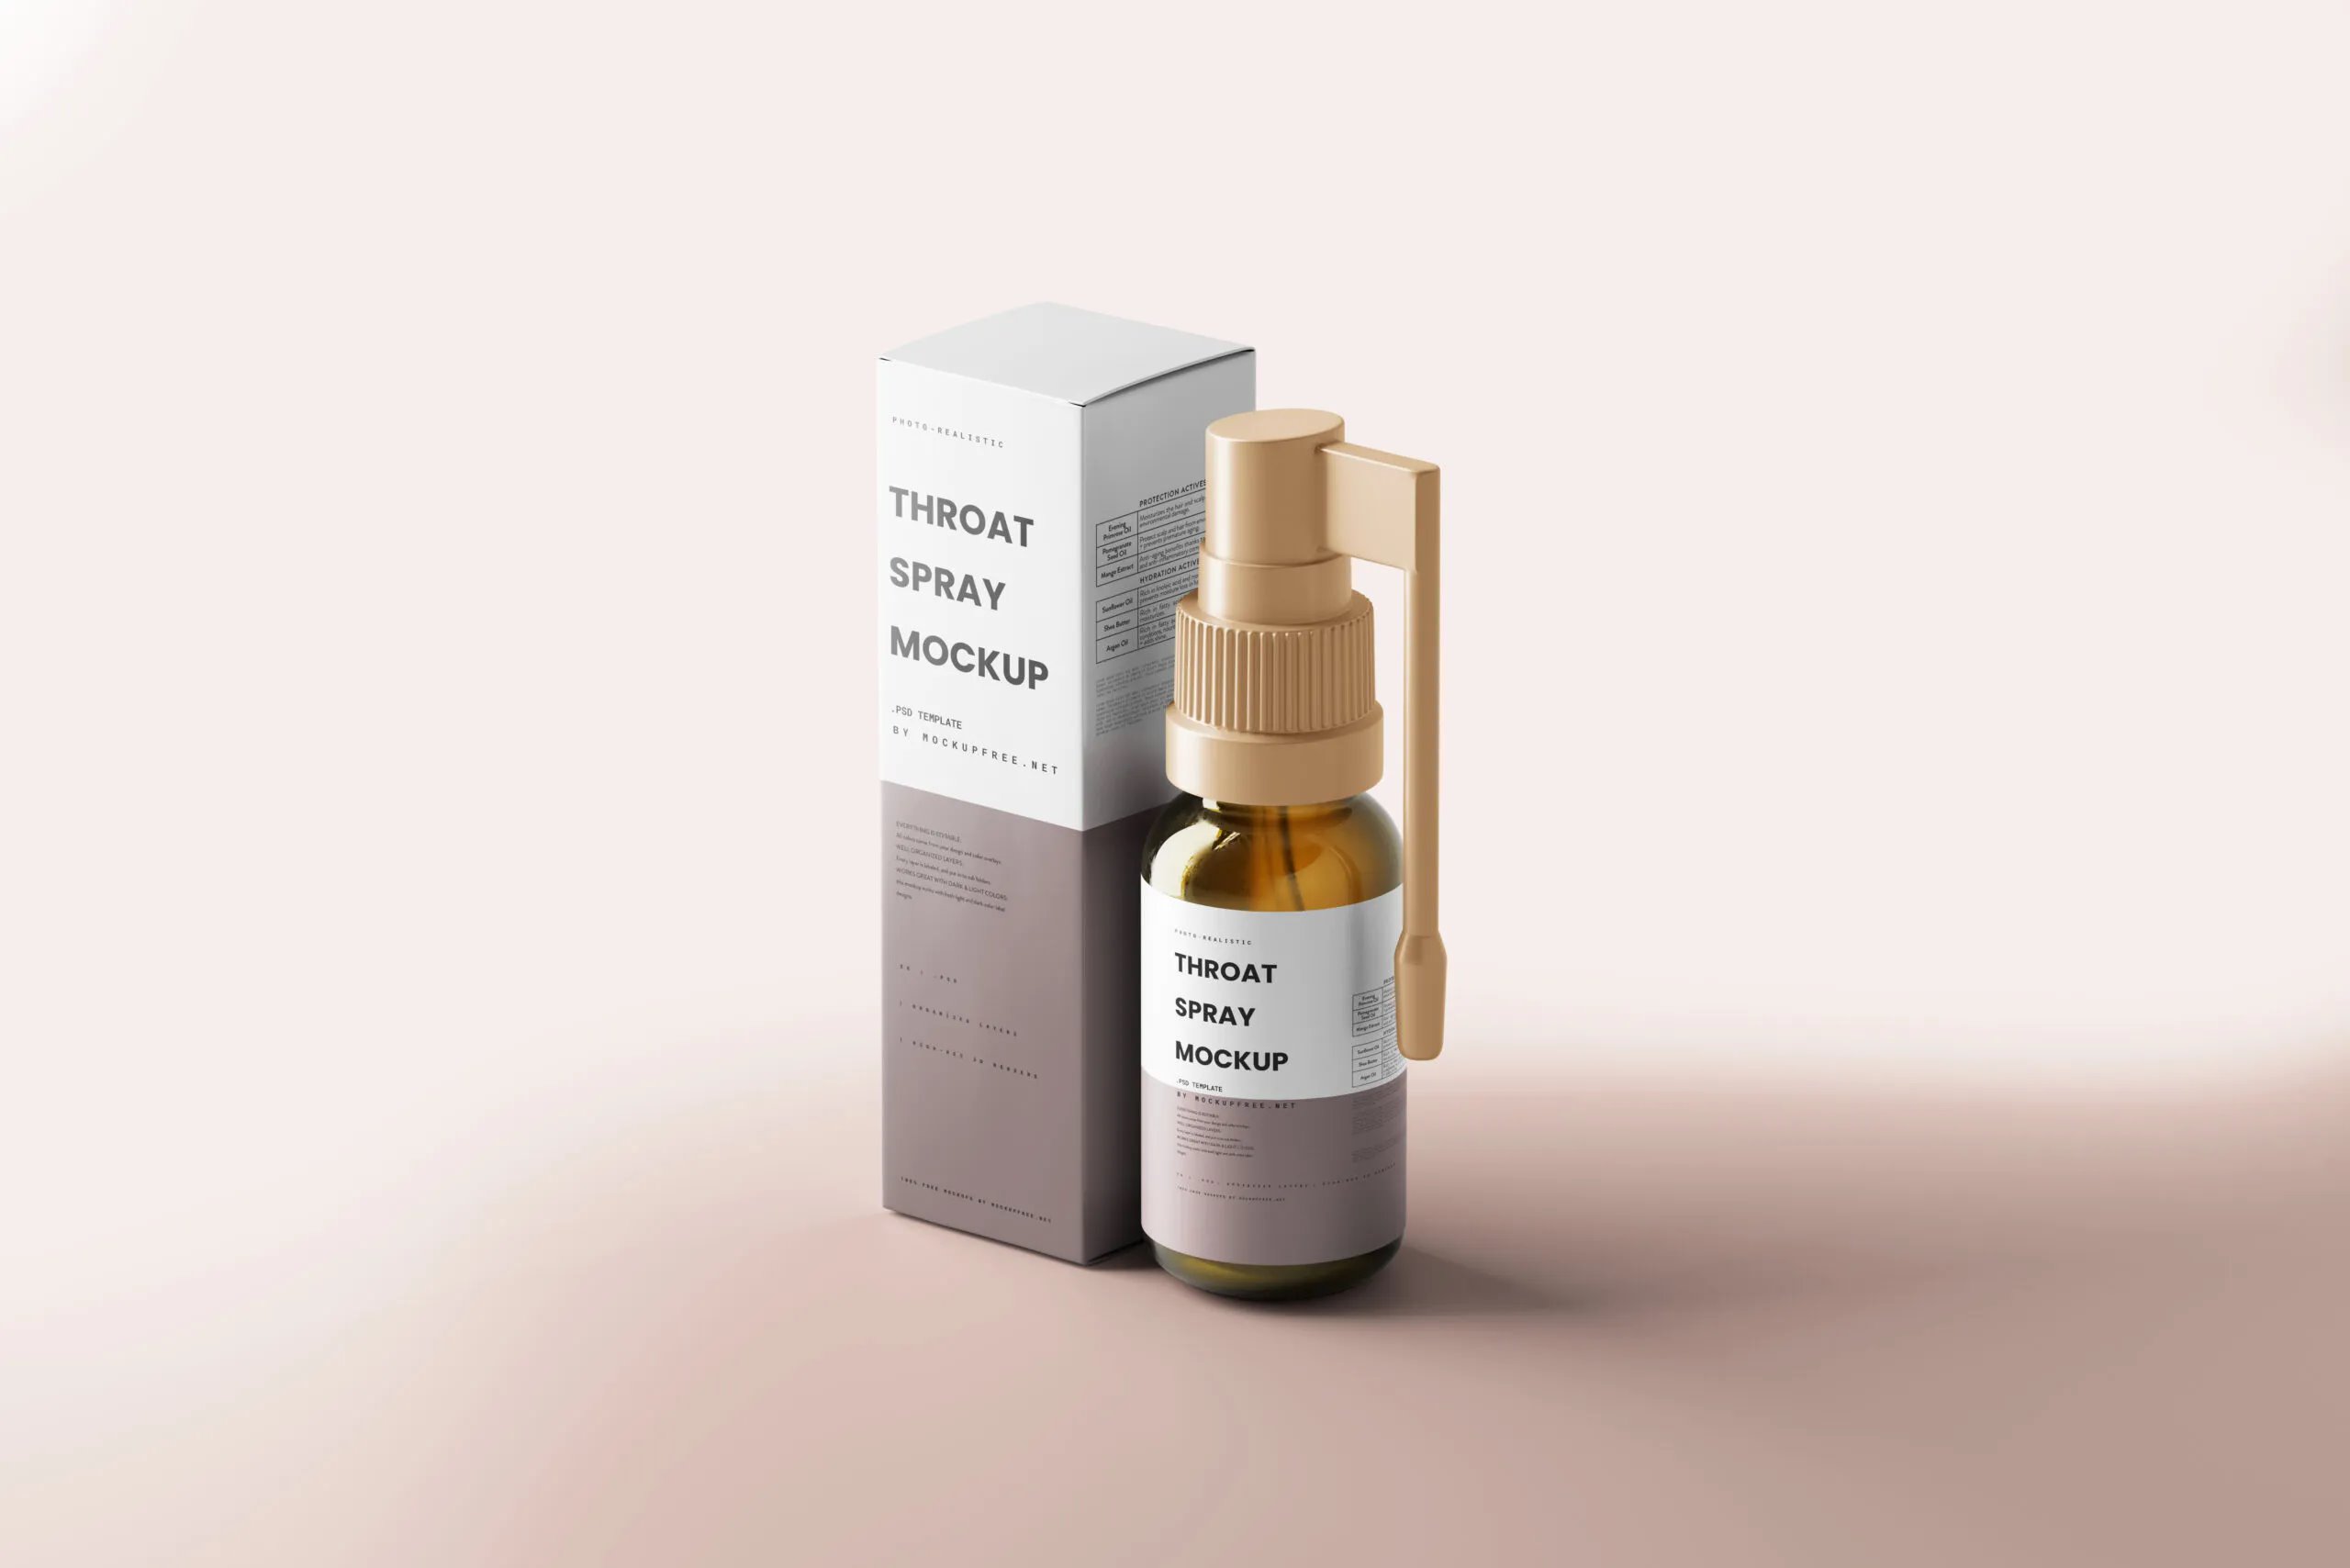 5 Throat Spray with Box Mockups in Different Sights FREE PSD